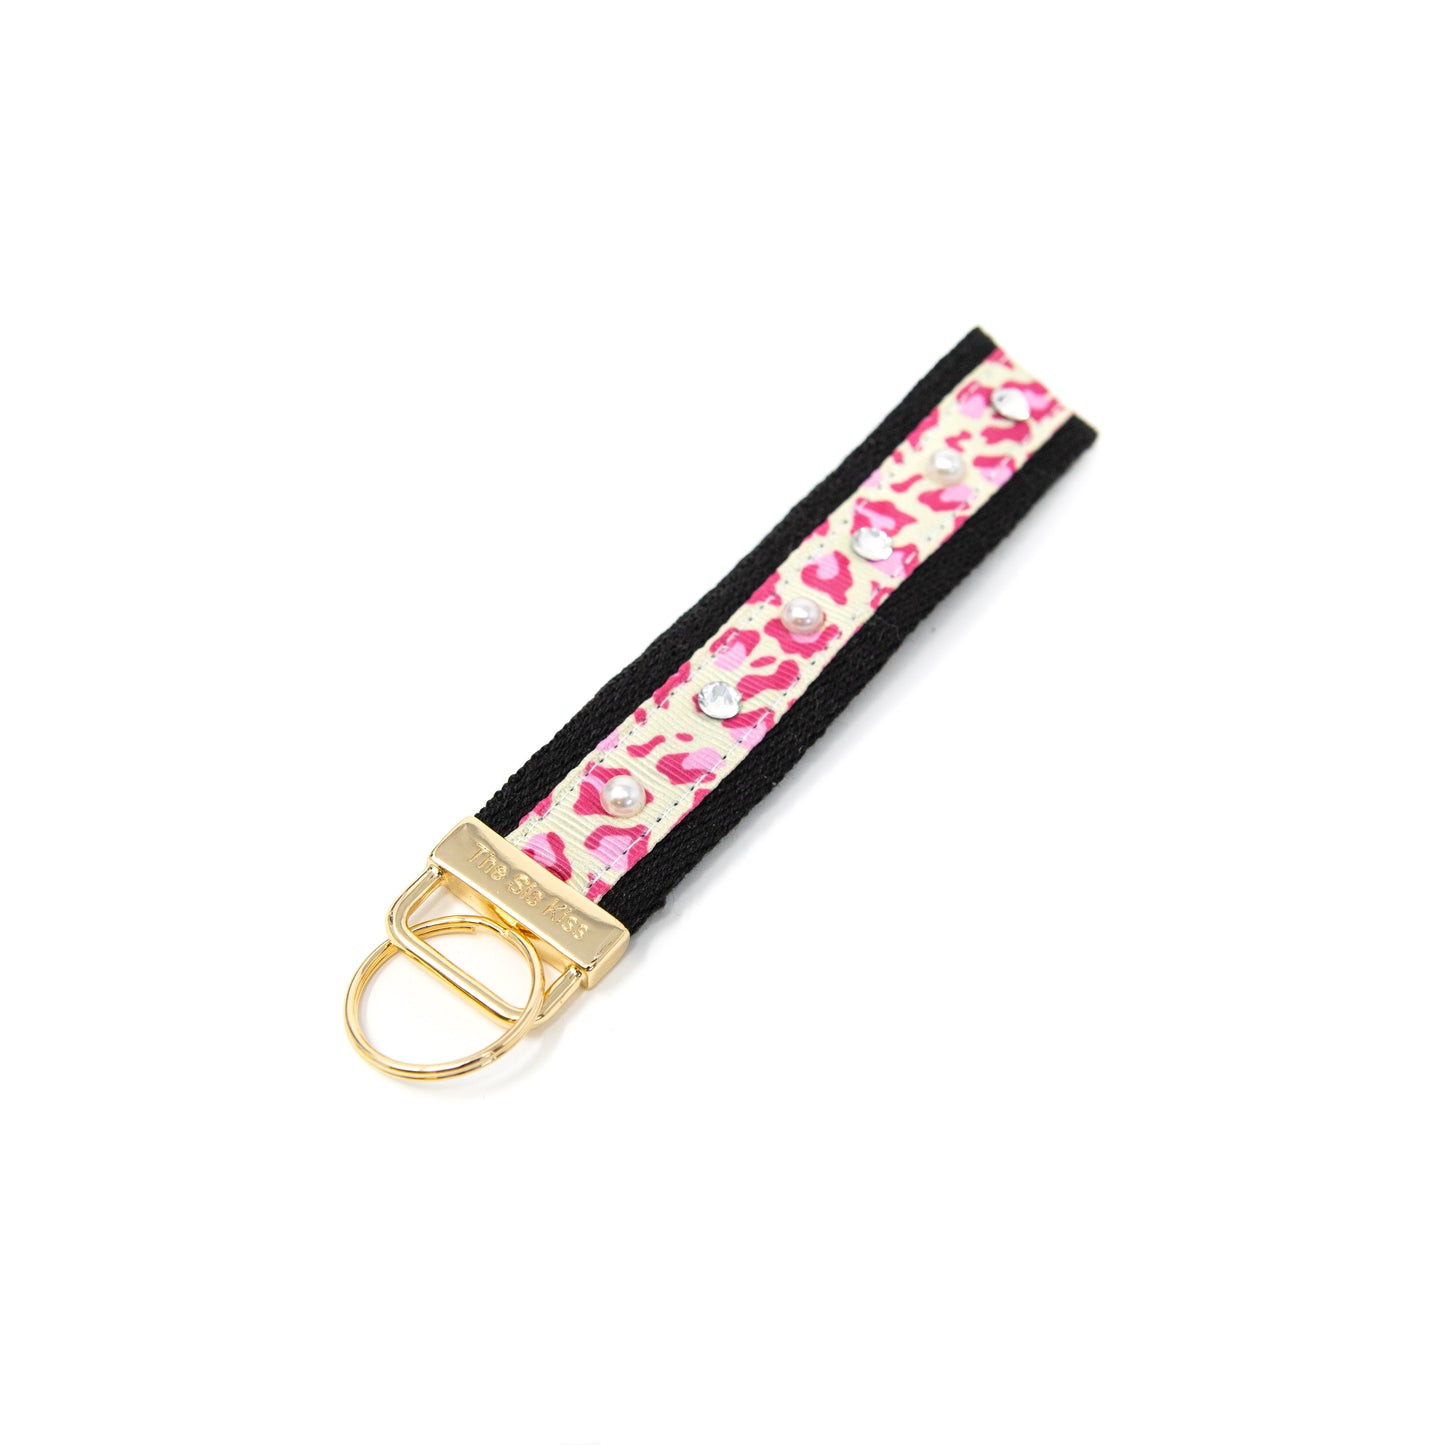 Leopard and Tie Dye Keychains ACCESSORY The Sis Kiss Pink Leopard Print